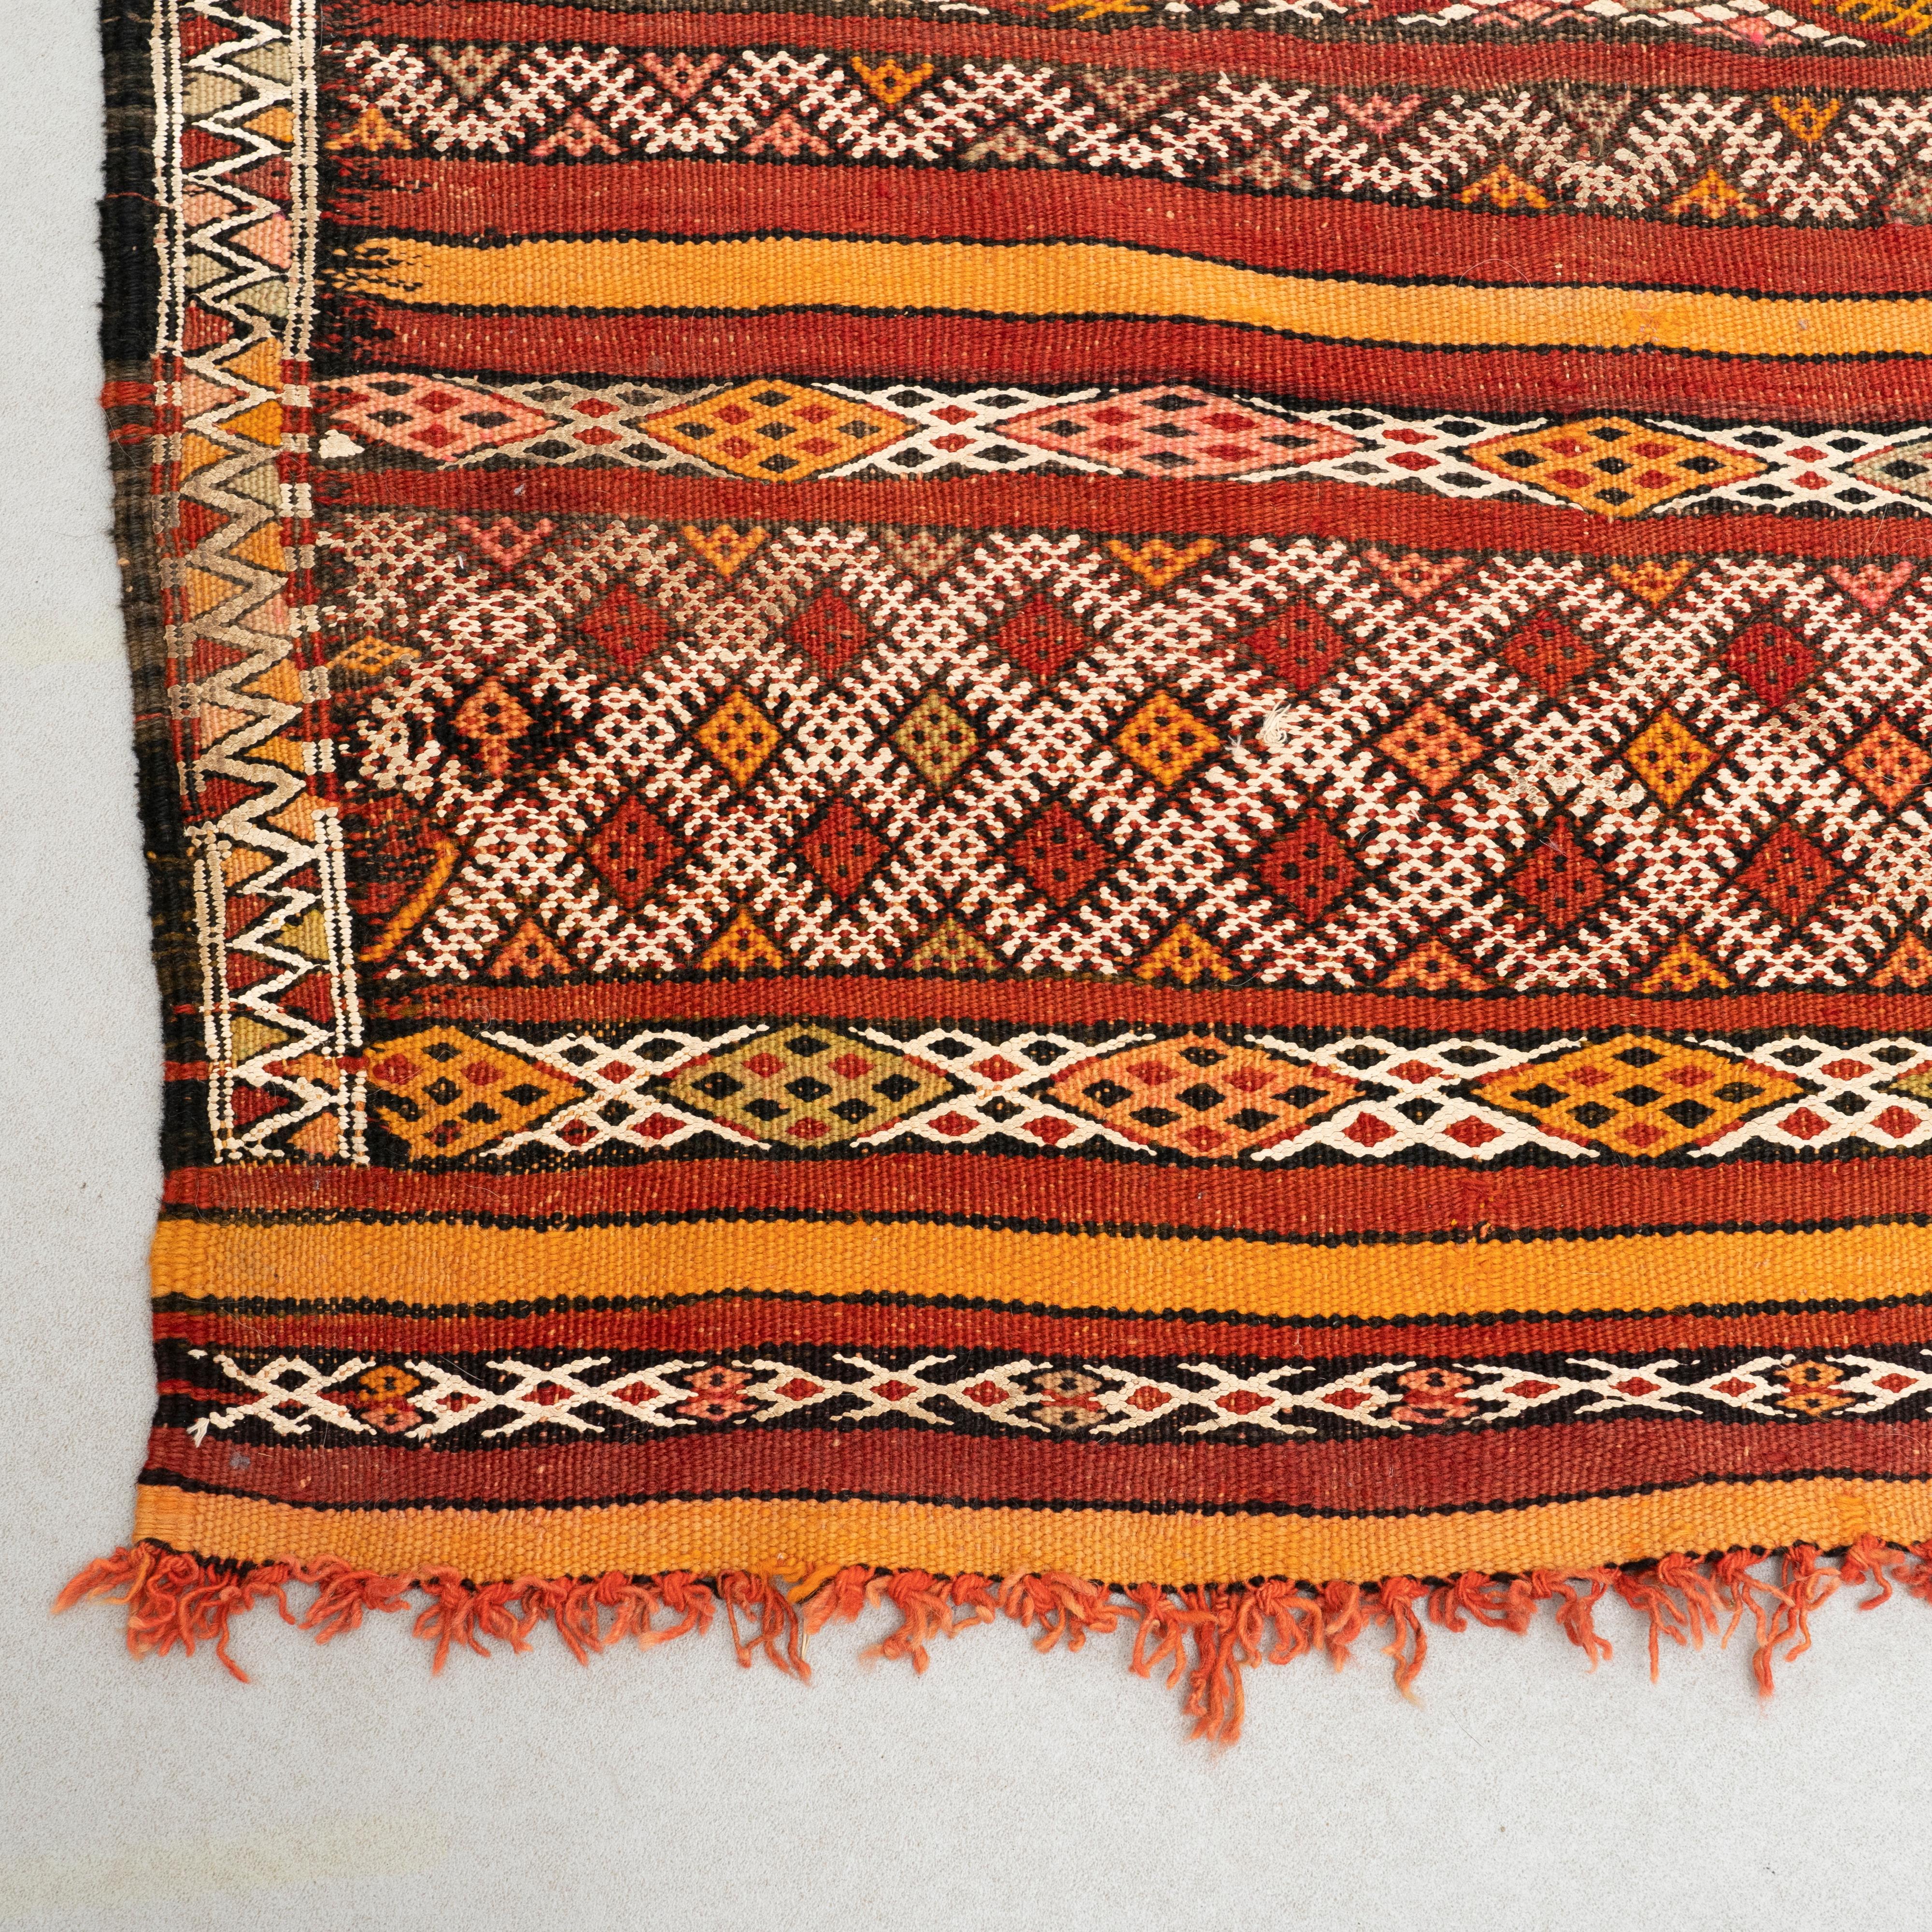 Handmade woven wool Moroccan rug.

Made by unkniown manufacturer in Morocco, circa 1960.

In original condition with minor wear consistent of age and use, preserving a beautiful patina.

Materials:
Wool.